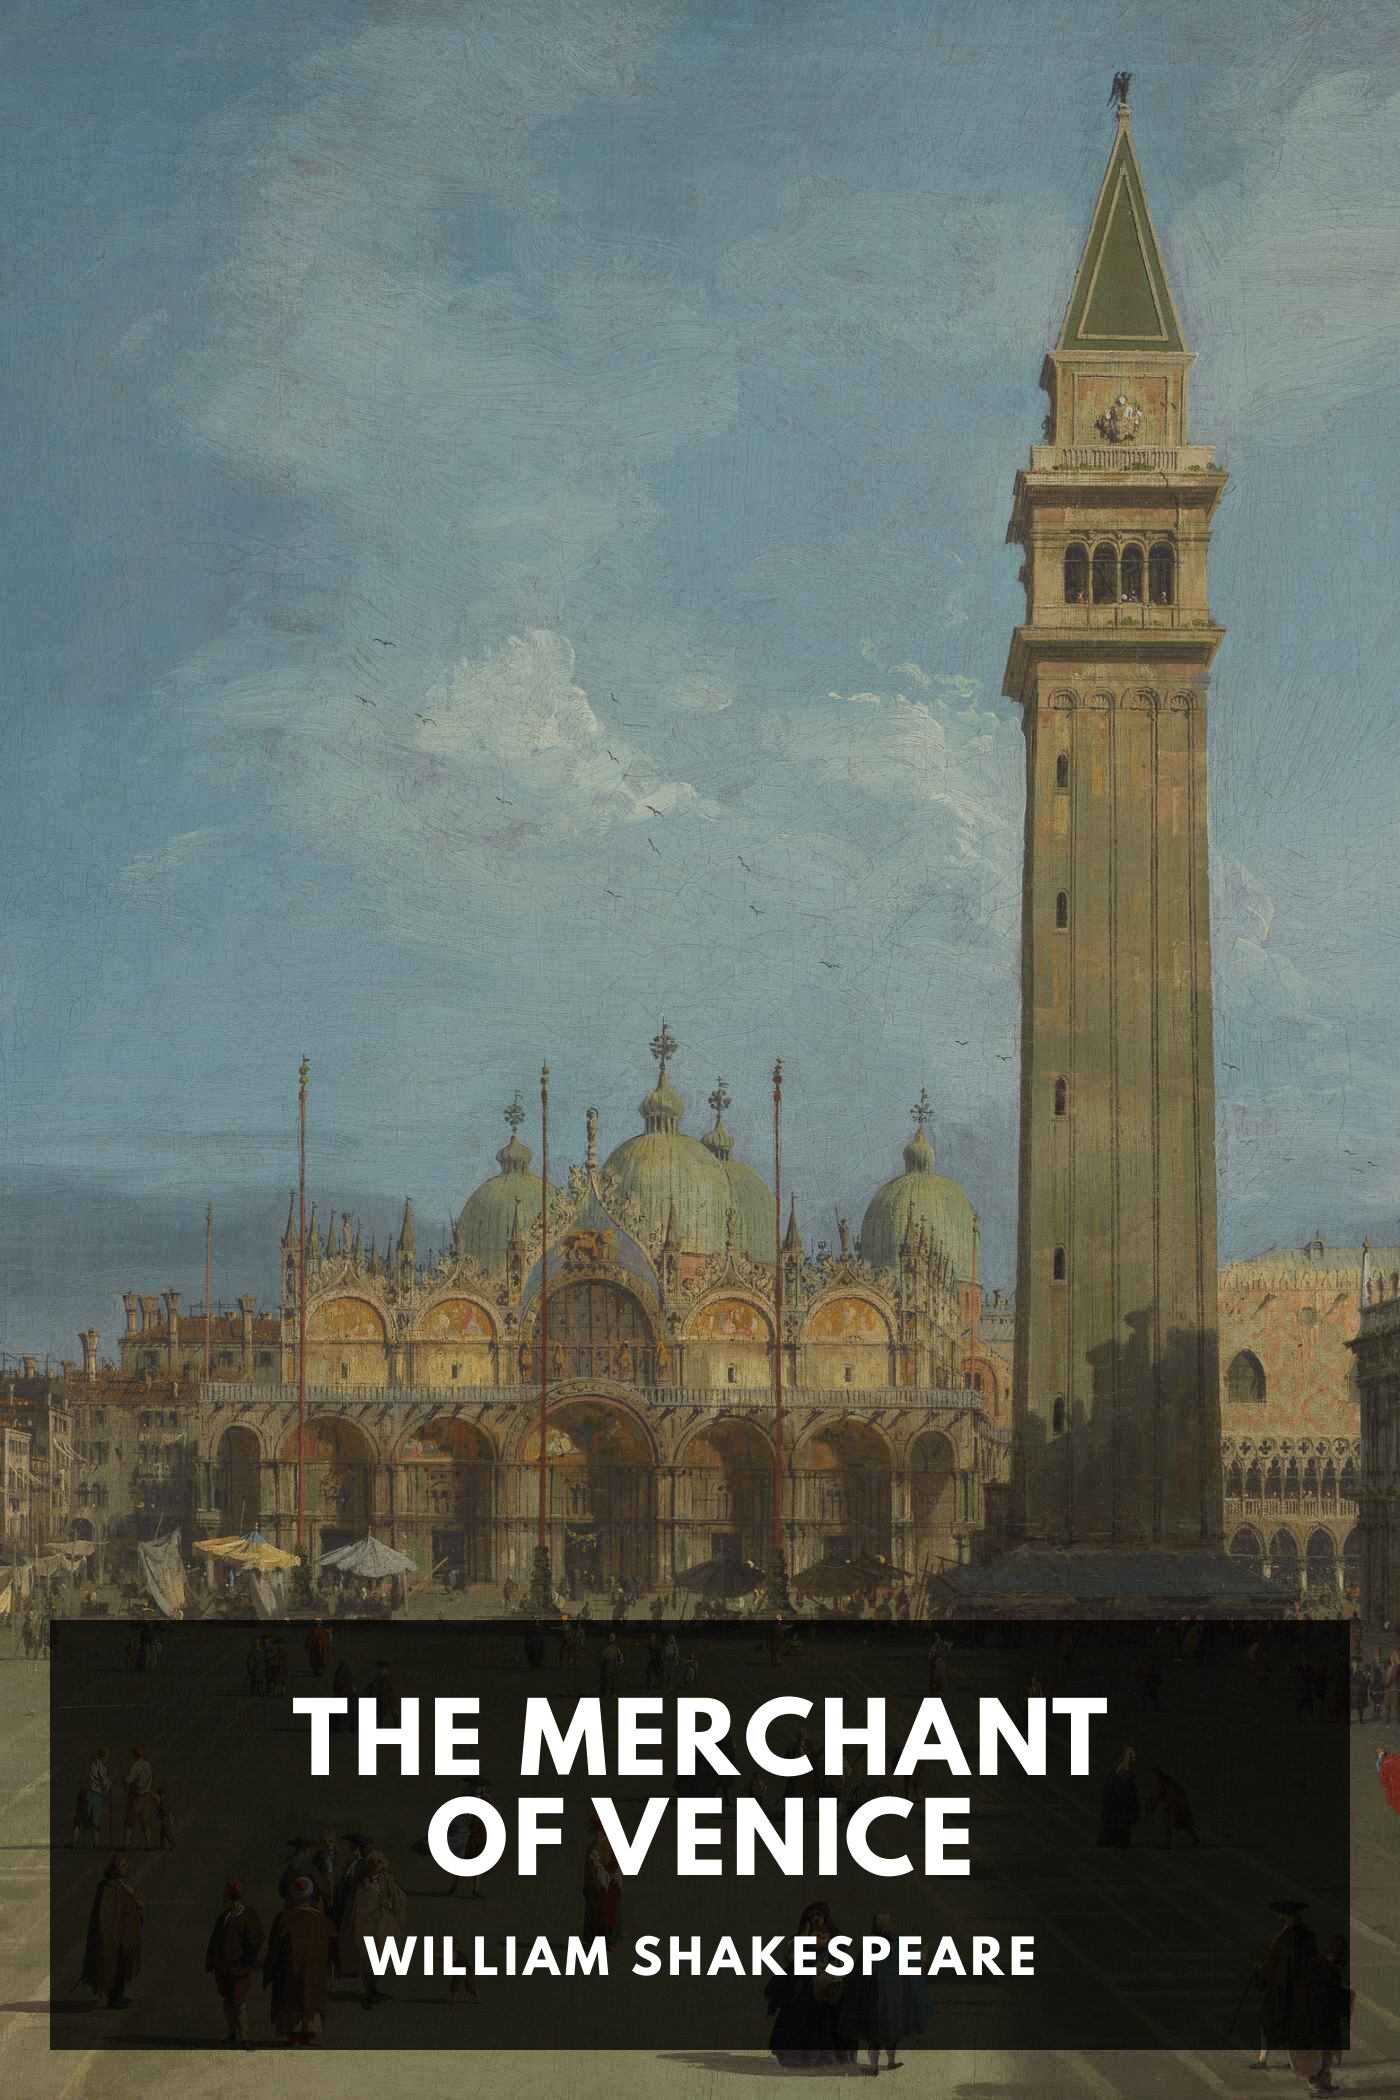 book review of merchant of venice in 100 words